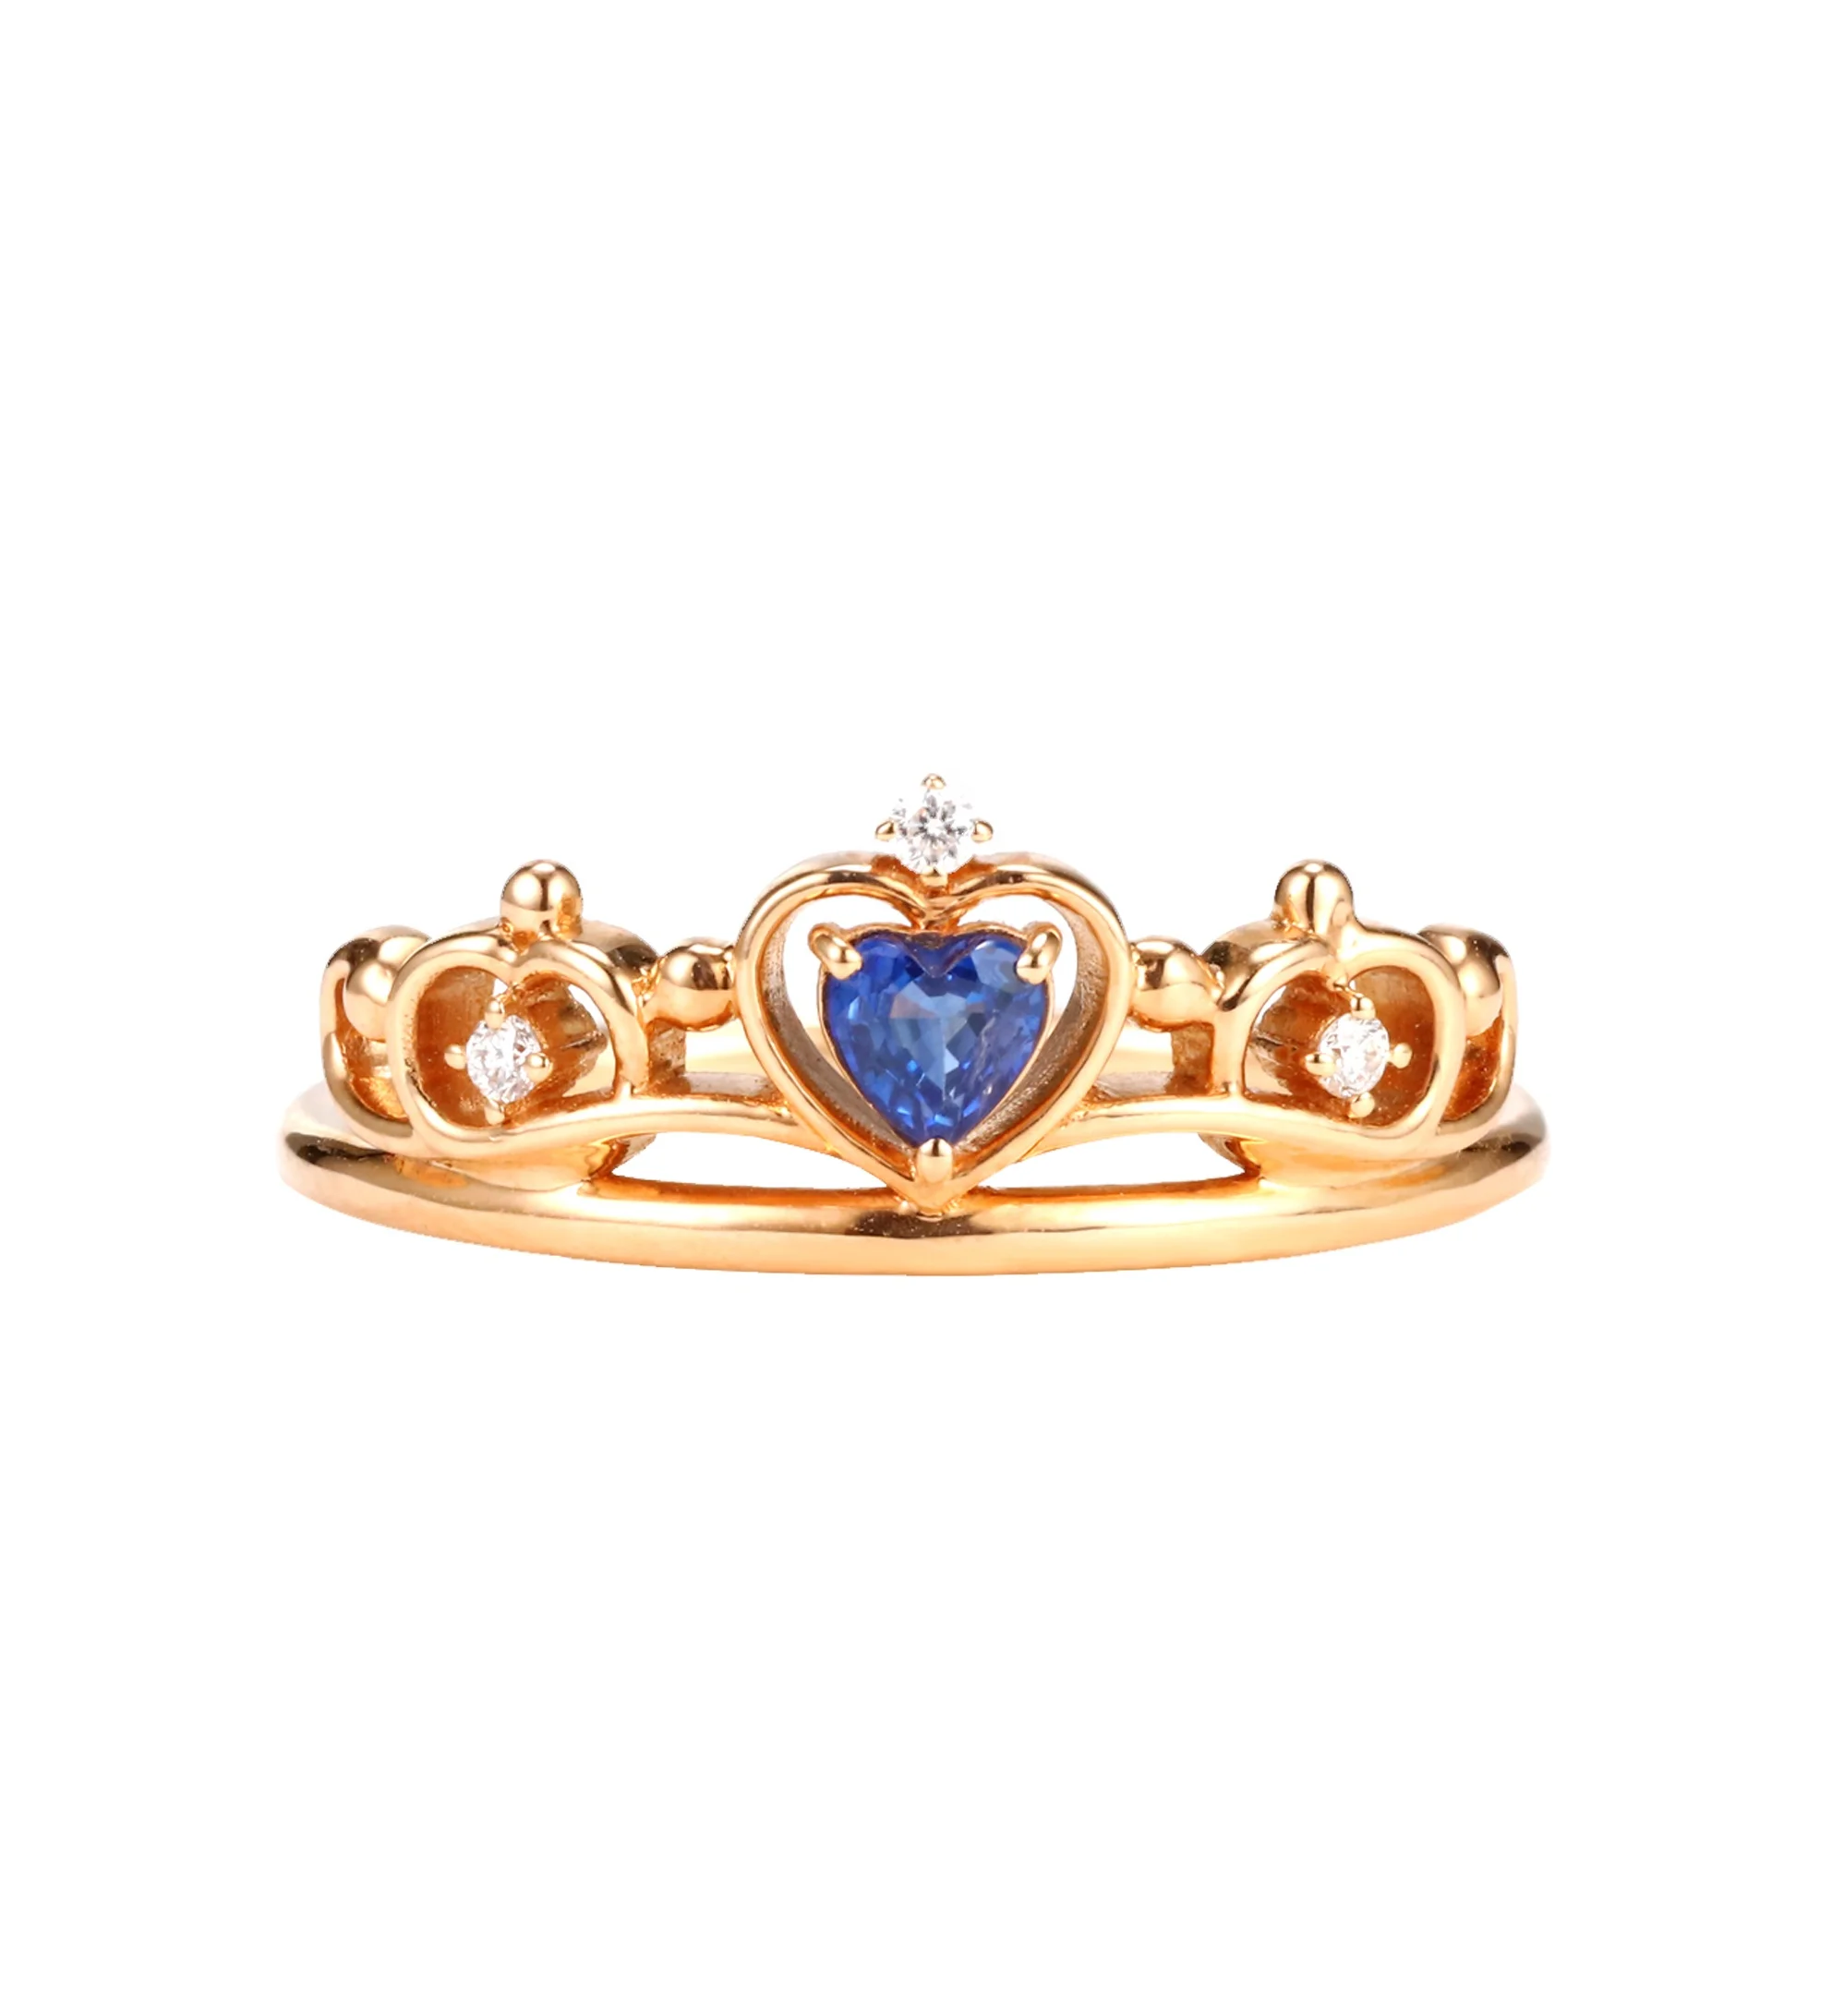 Antique Art Deco Natural Sapphire Engagement Ring Heart Shaped Crown Gold Wedding Rings